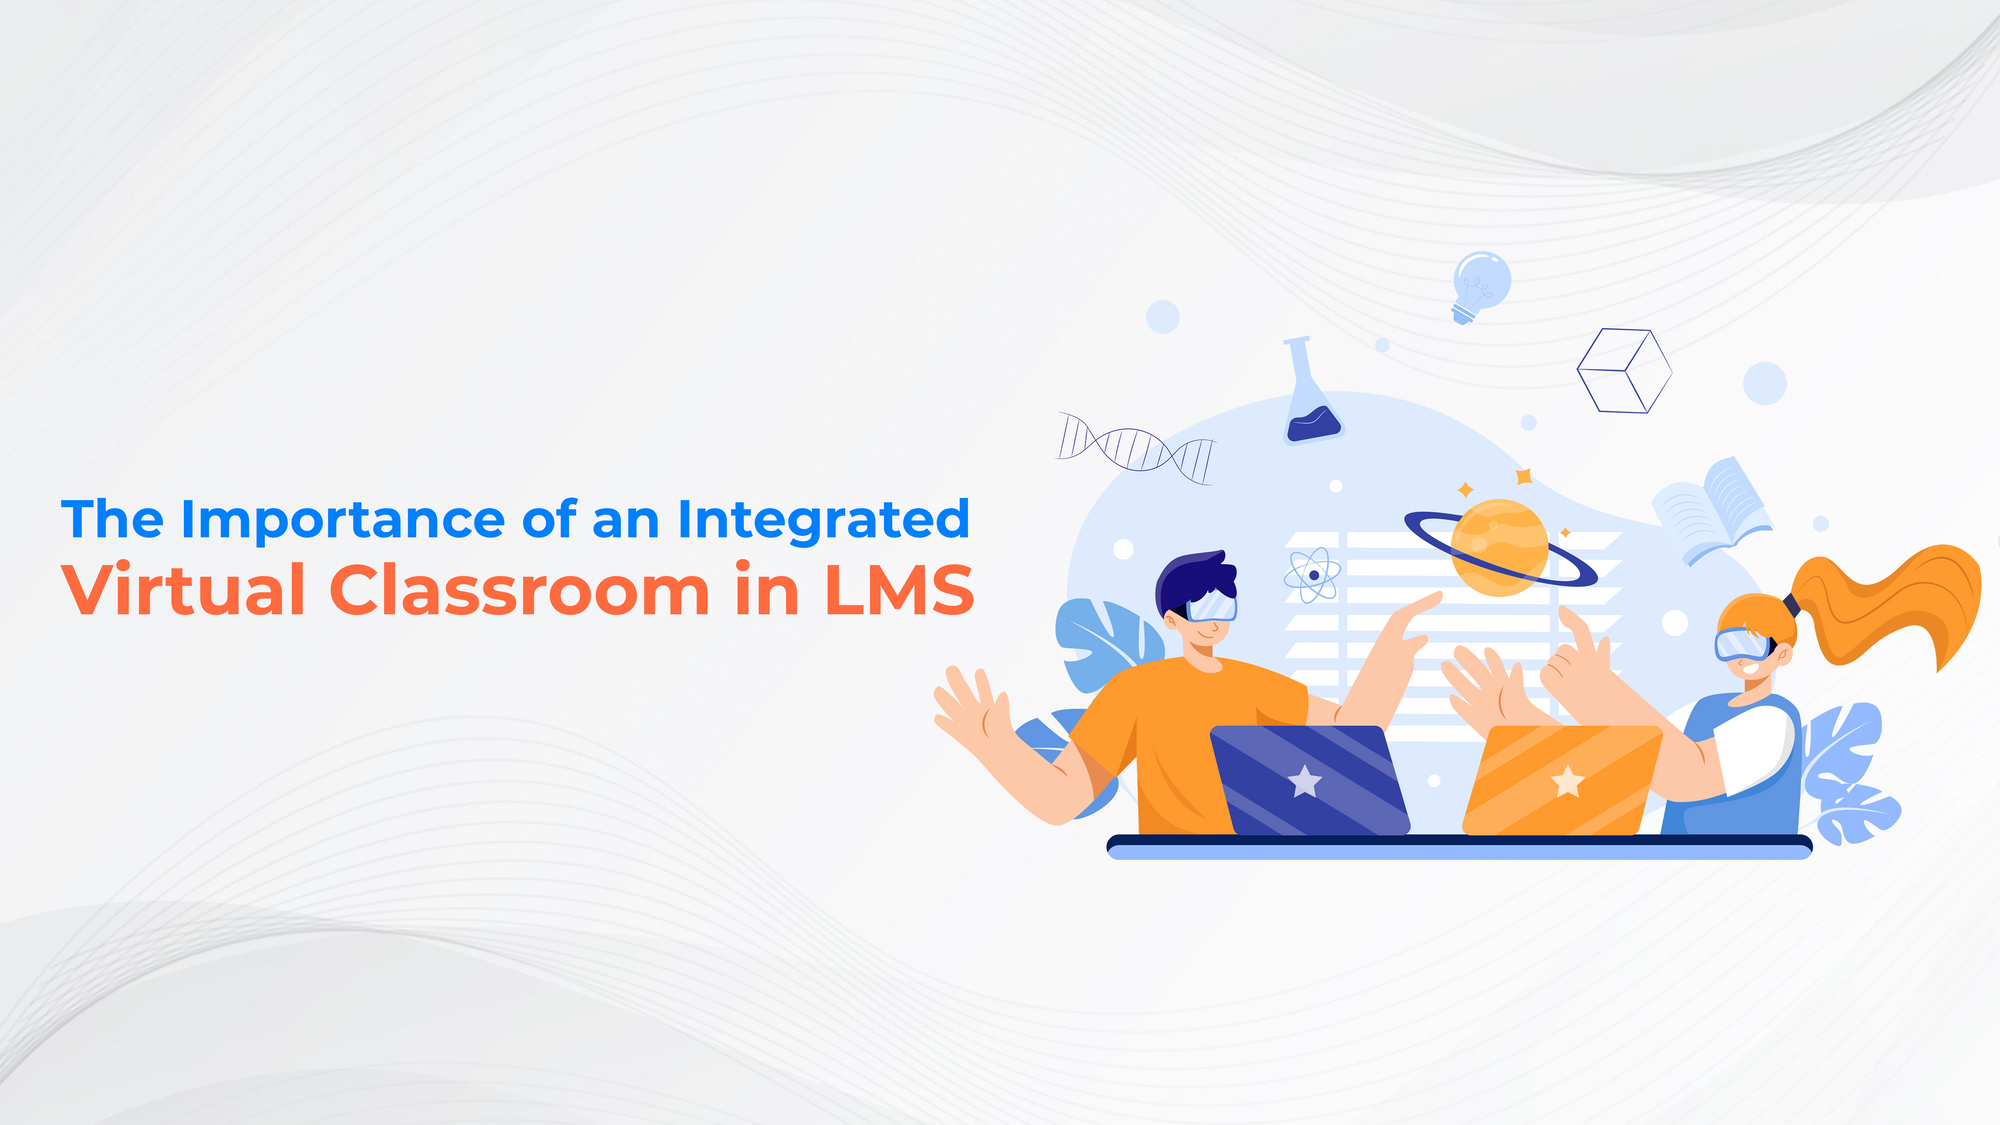 The Importance of an Integrated Virtual Classroom in a Learning Management System (LMS)